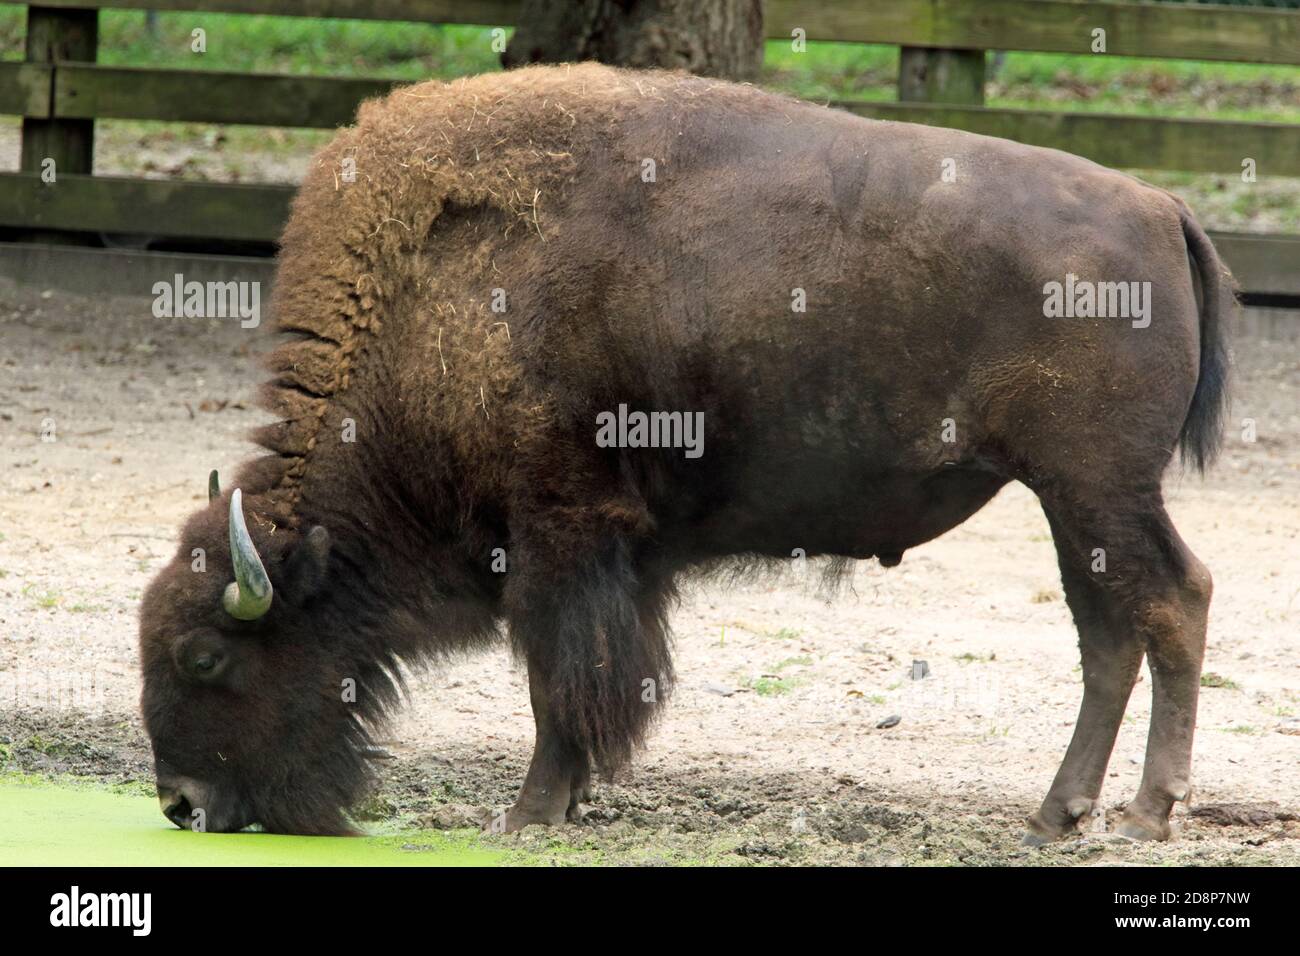 American Bison, Bison bison, at the Cape May County Zoo and Park, New Jersey, USA Stock Photo